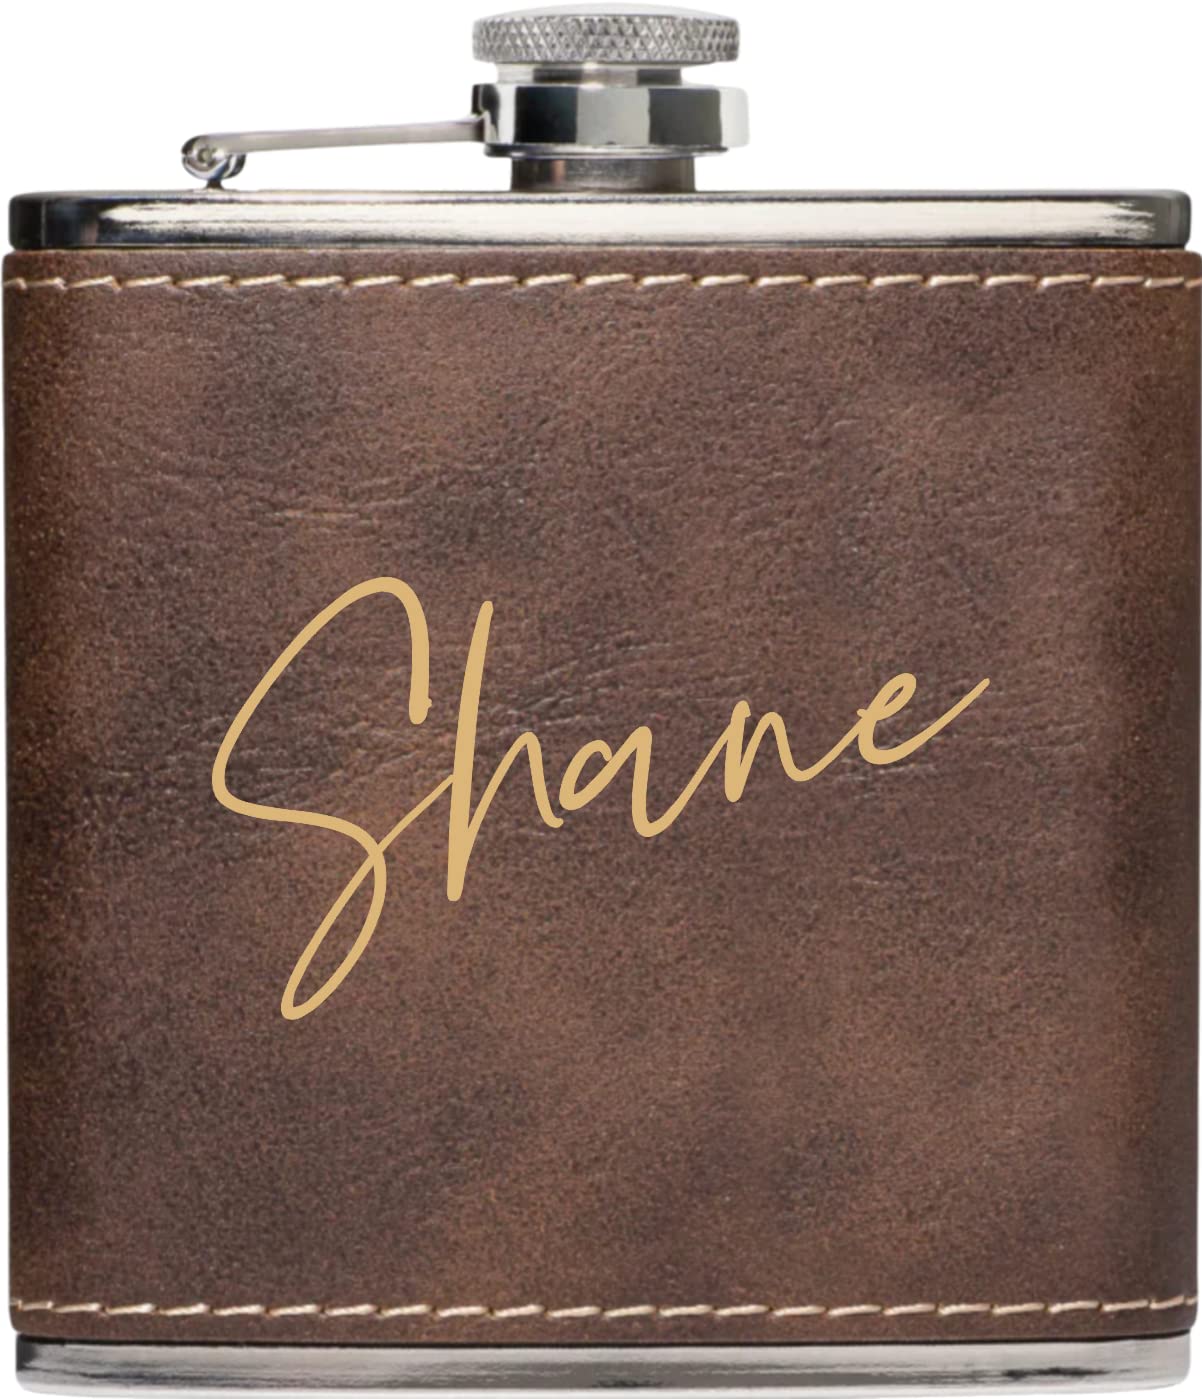 Personalized Flask For Wedding Gift. Customized Flask Gift Set. Engraved Leatherette Flask With Optional Gift Box For Groomsmen Gifts. Engraved Flask (Rustic & Gold)